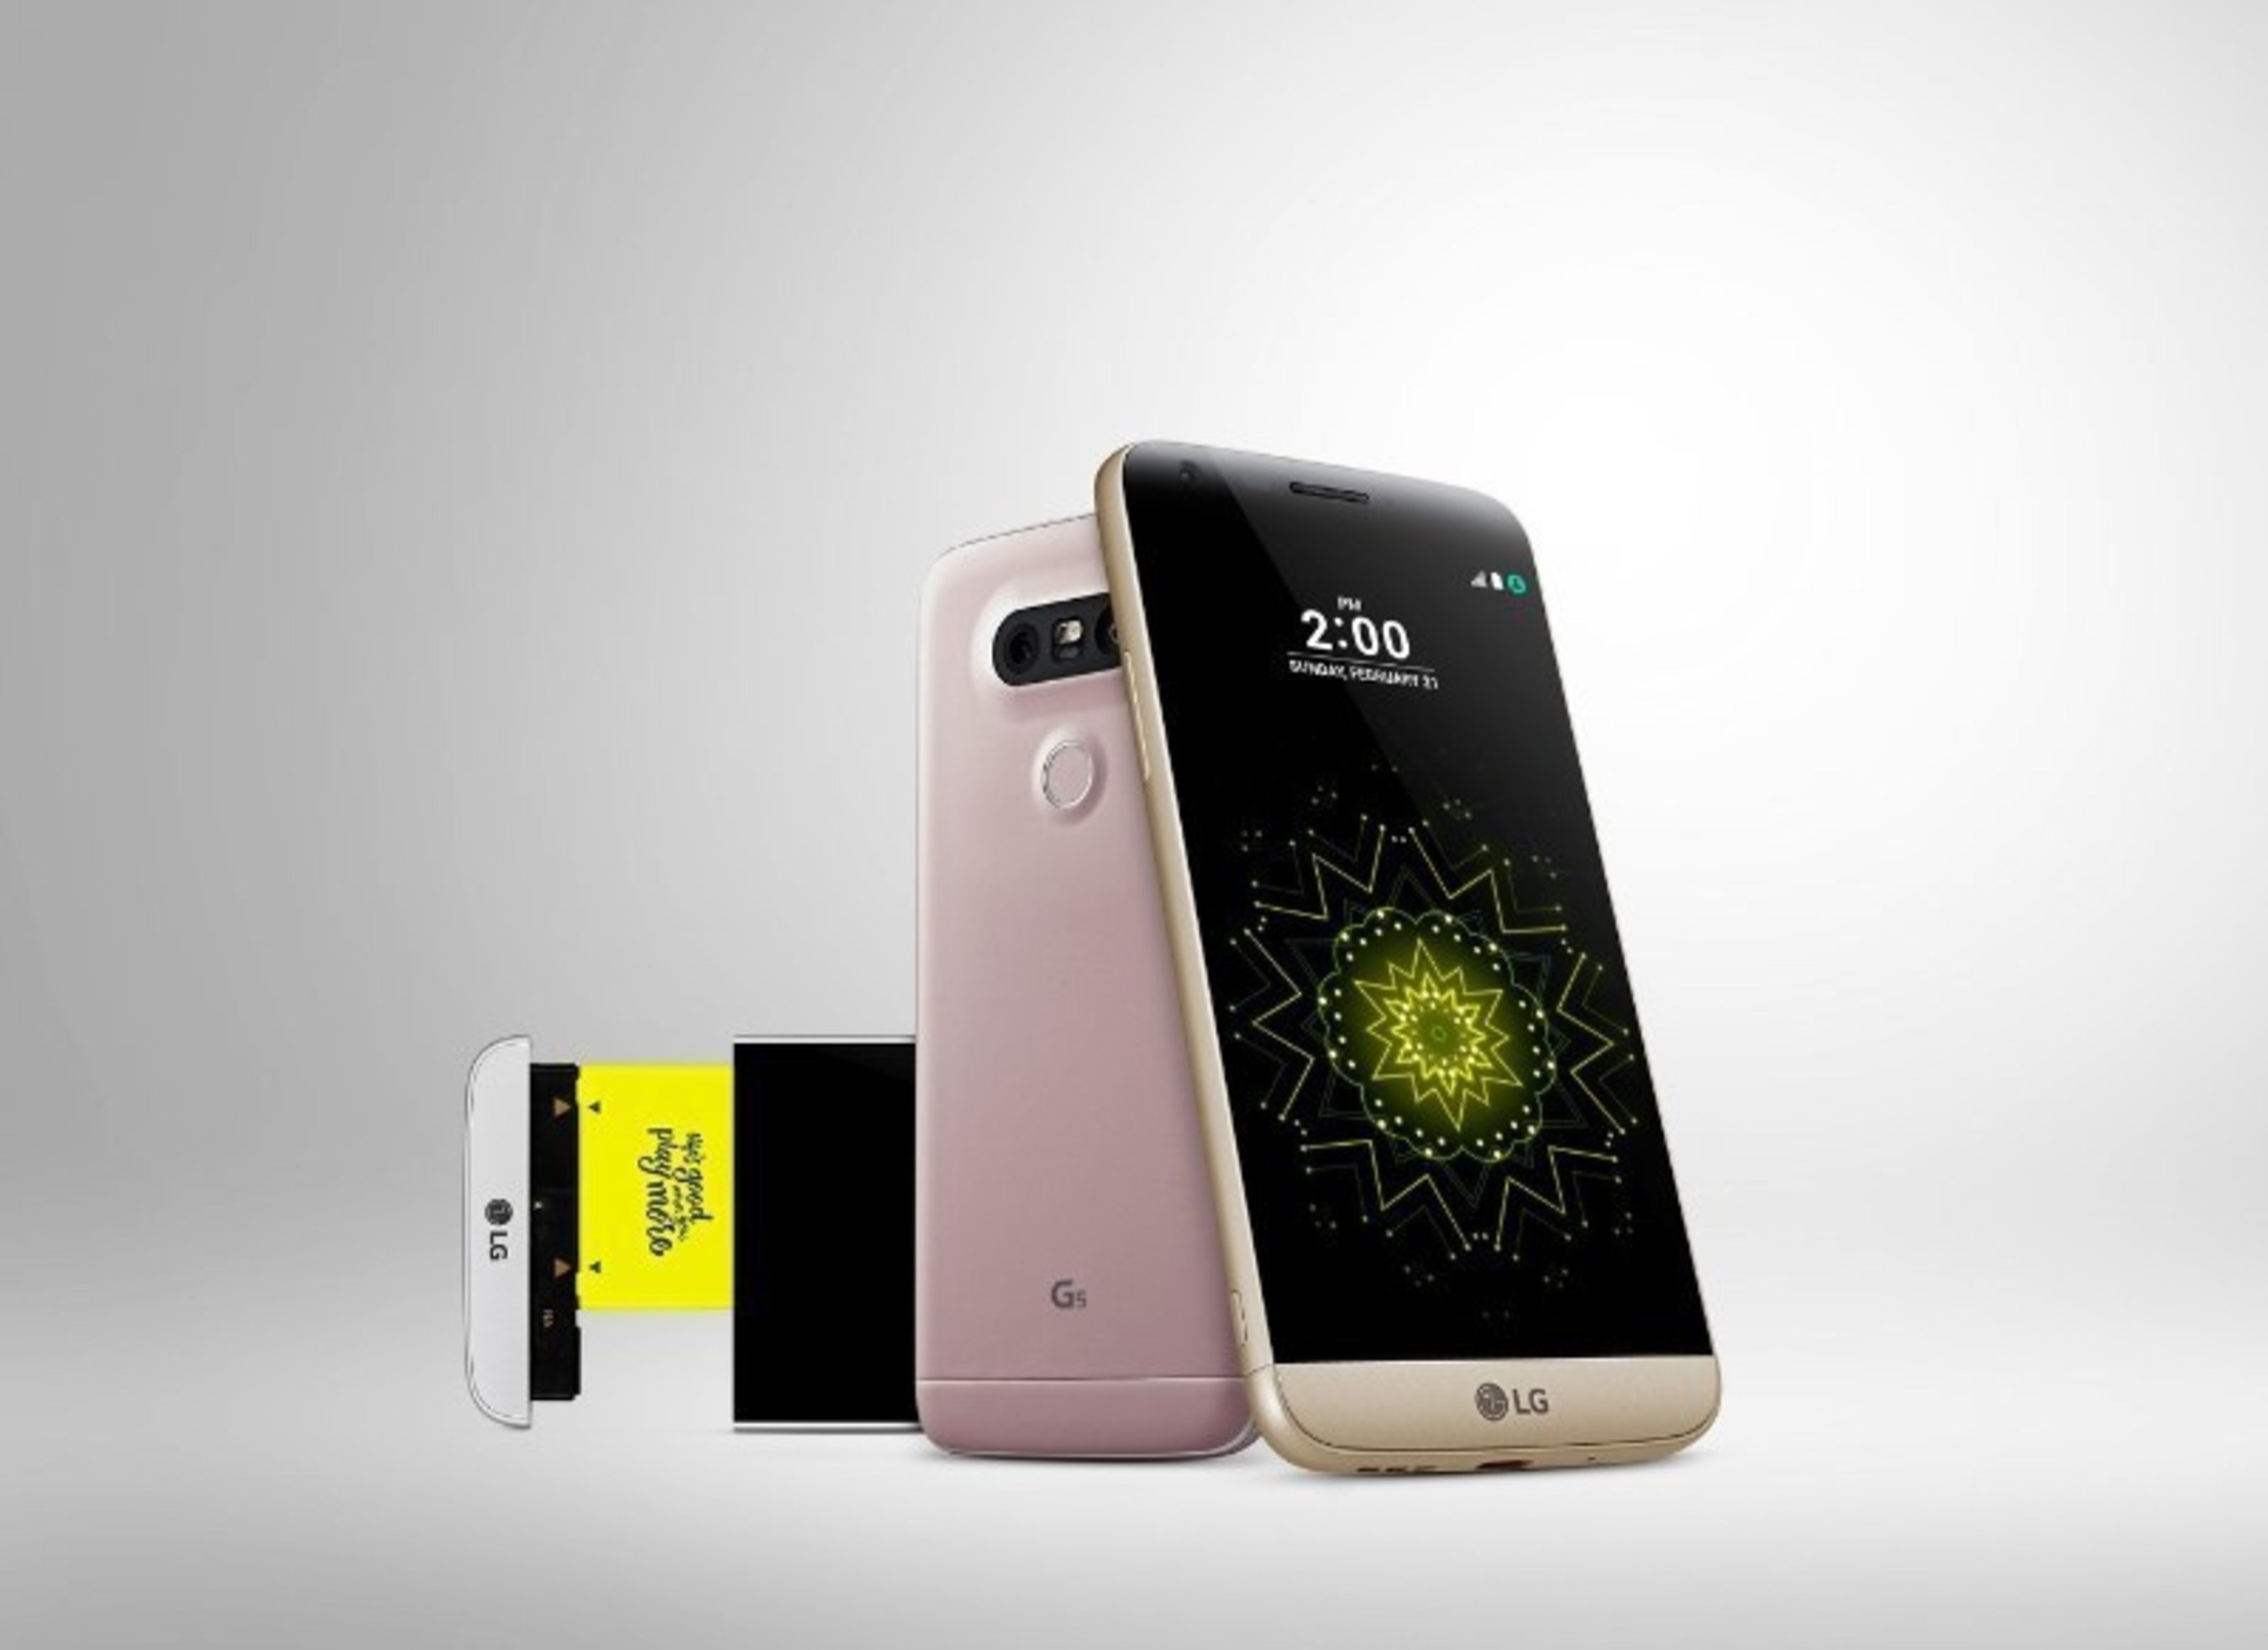 LG G5 Smartphone and 'LG Friends' Devices on Sale in U.S. Early April